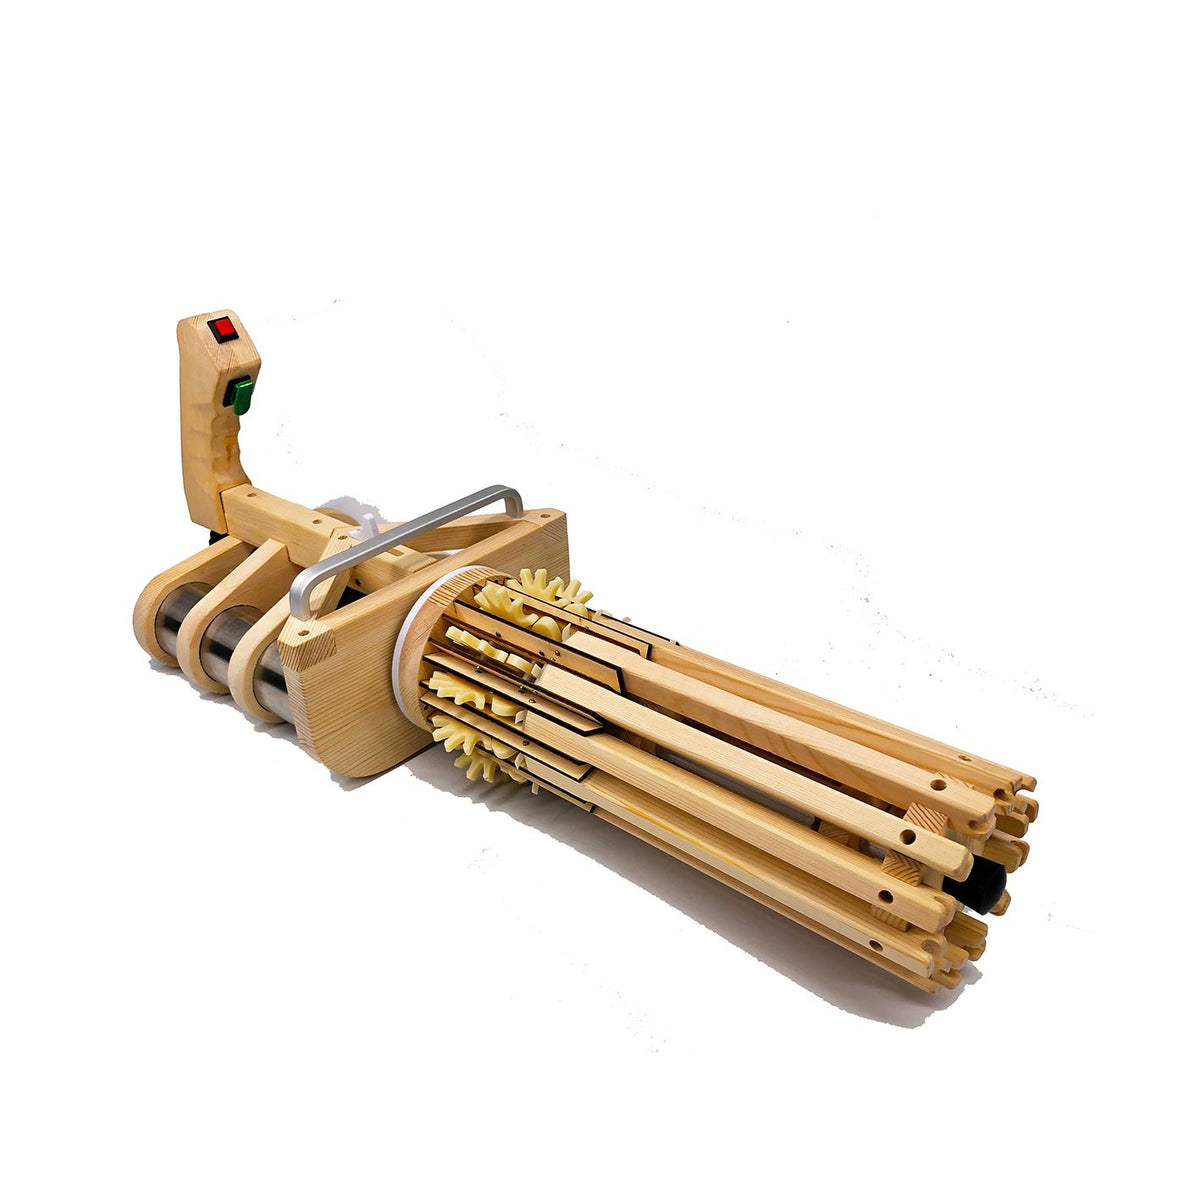 Mini Equipment Wood Gatling machine gun | Rubber Band Gun Toy Pistol for Boys | Kids Toy Gun for Indoor Outdoor Games and Pretend Play | 156 consecutive shots